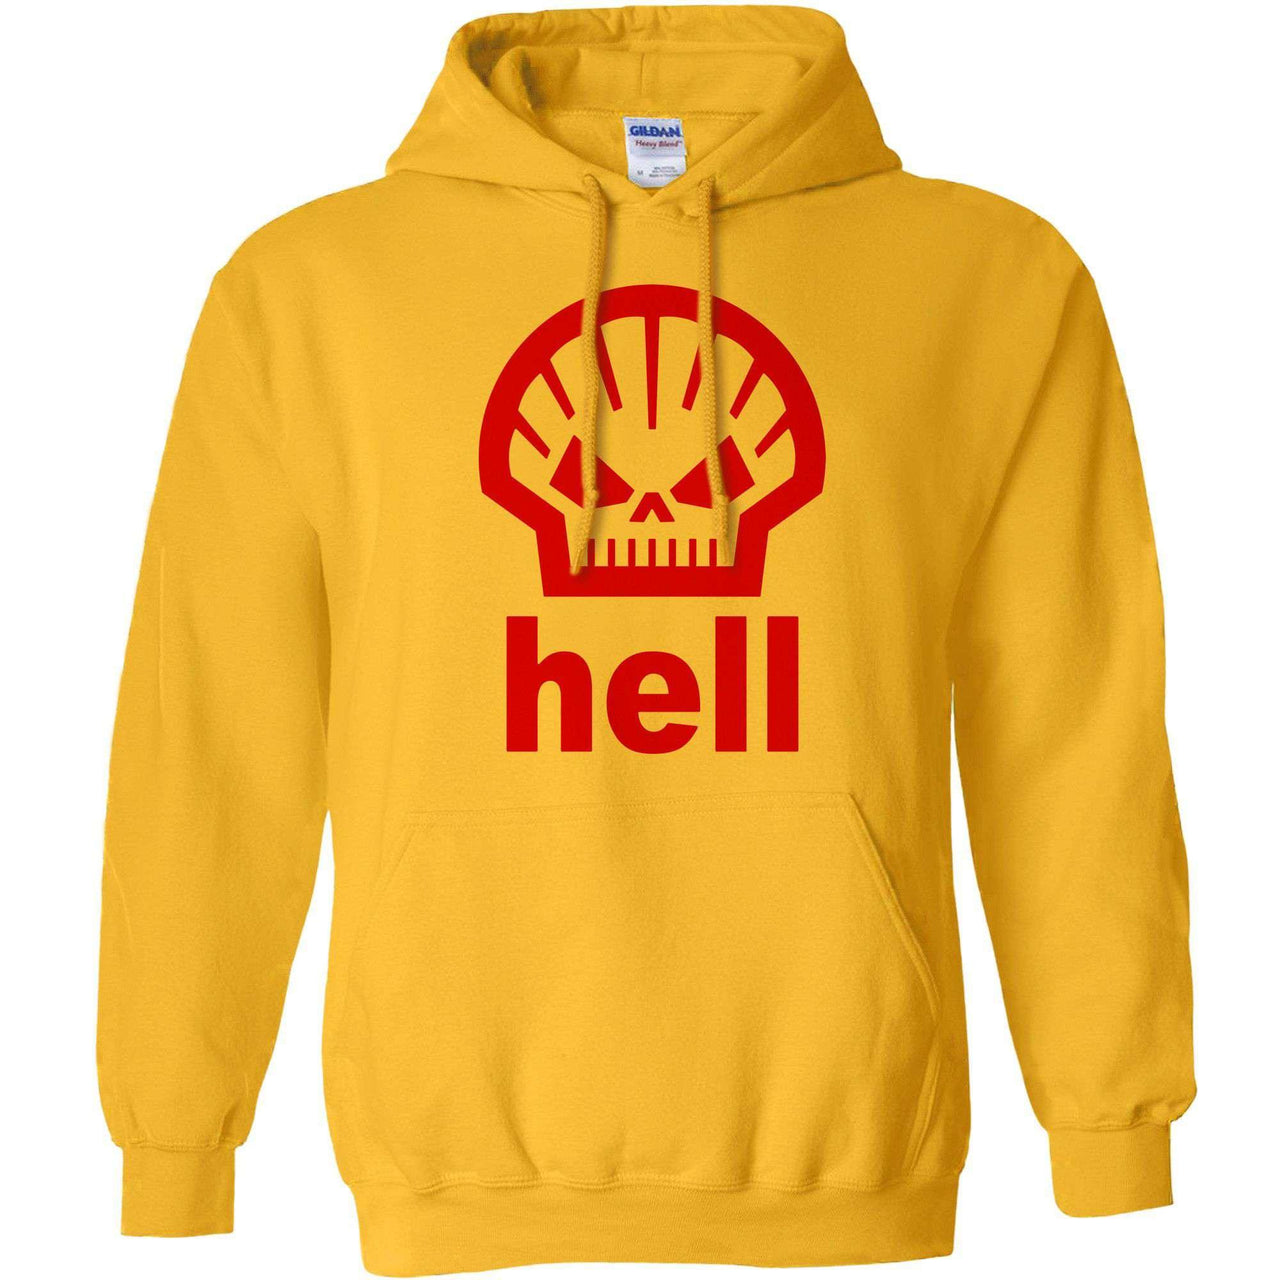 Hell Skull Hoodie For Men and Women As Worn By Heath Ledger 8Ball